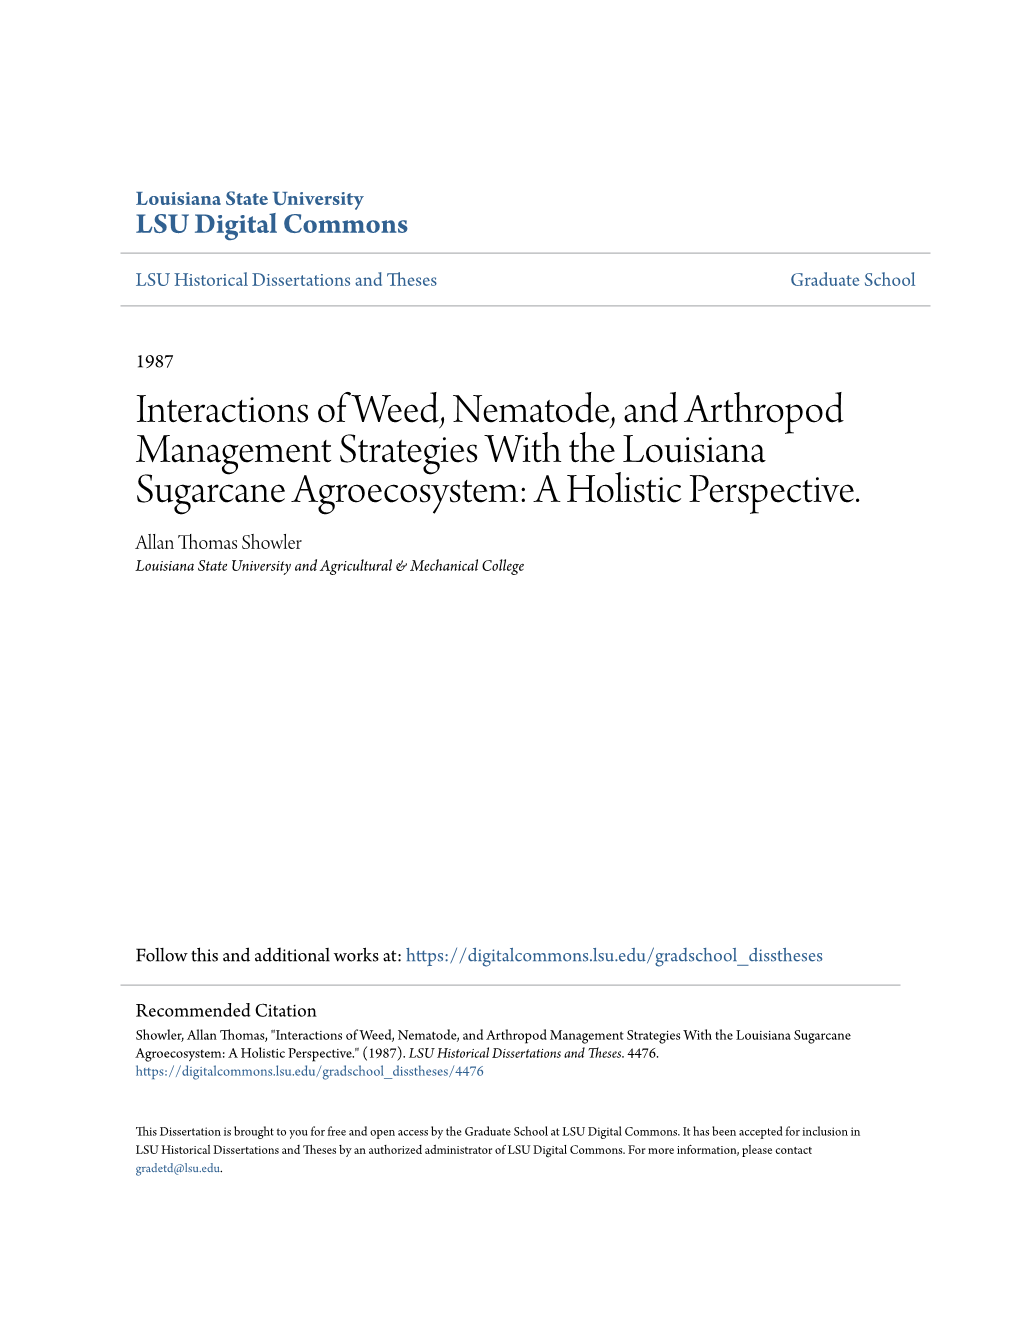 Interactions of Weed, Nematode, and Arthropod Management Strategies with the Louisiana Sugarcane Agroecosystem: a Holistic Perspective